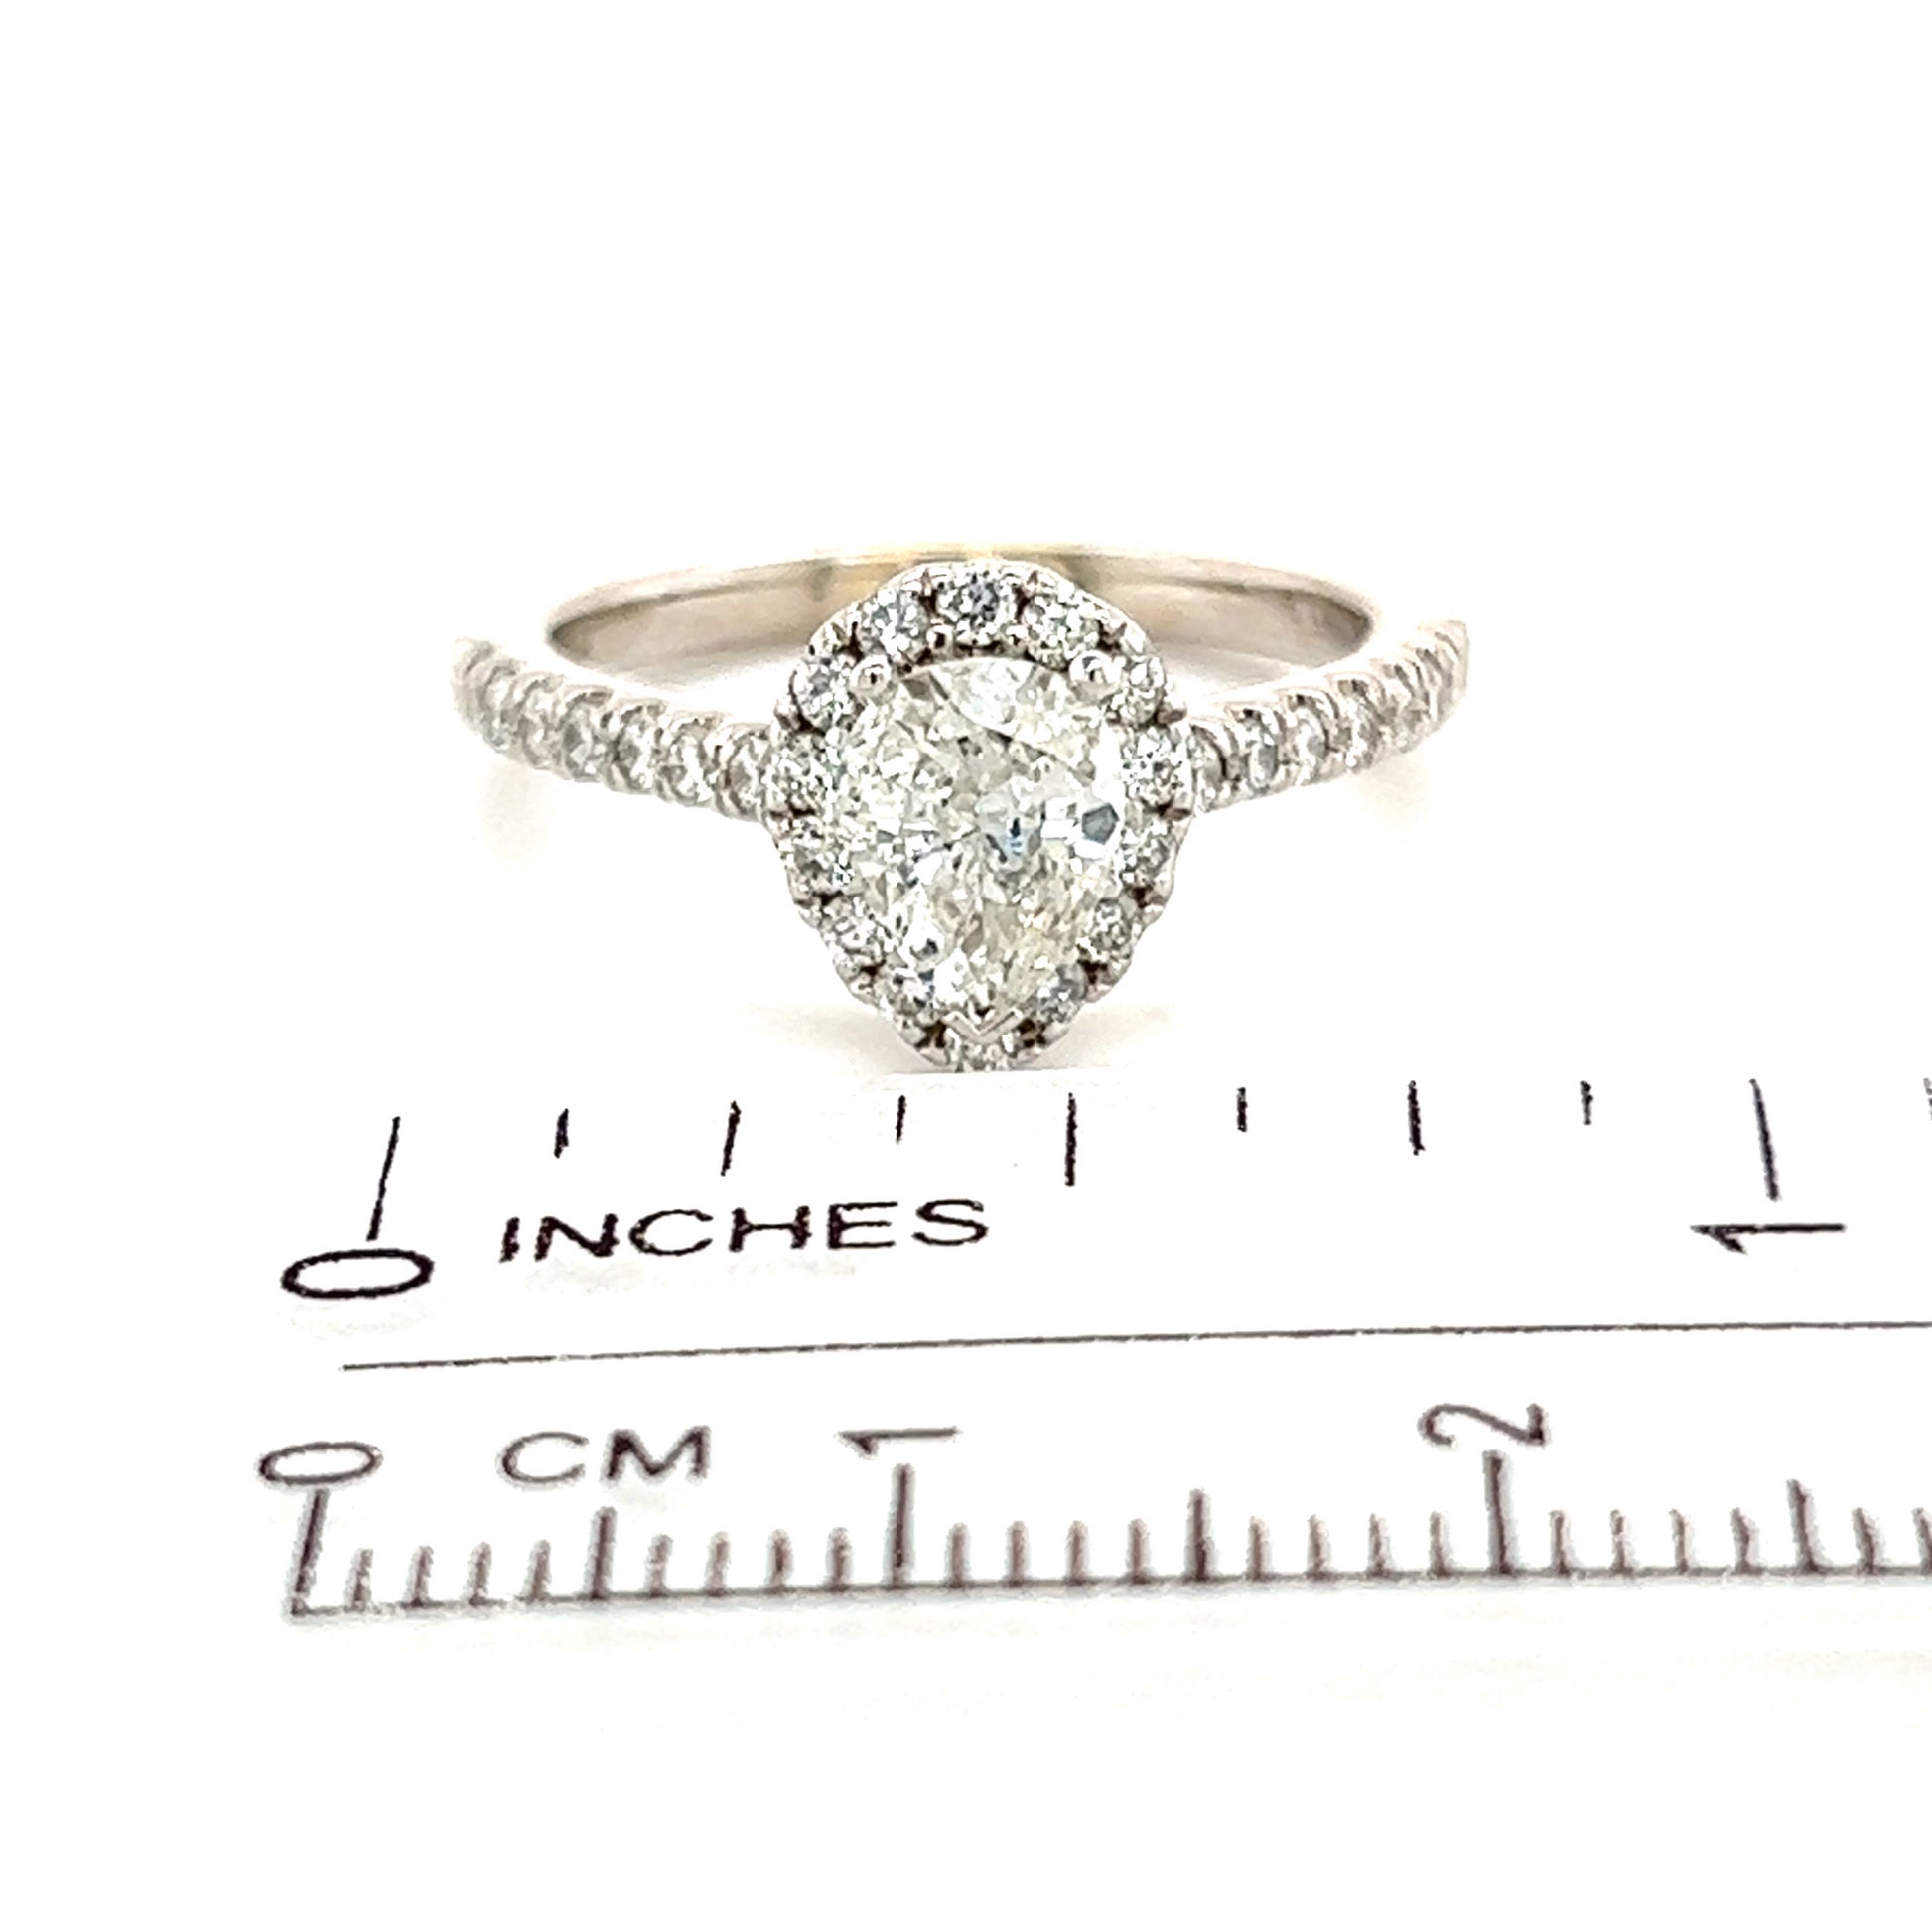 Pear Shaped Diamond Engagement Ring 14k Gold 1.19 TCW Certified $6,090 121438 - Certified Estate Jewelry